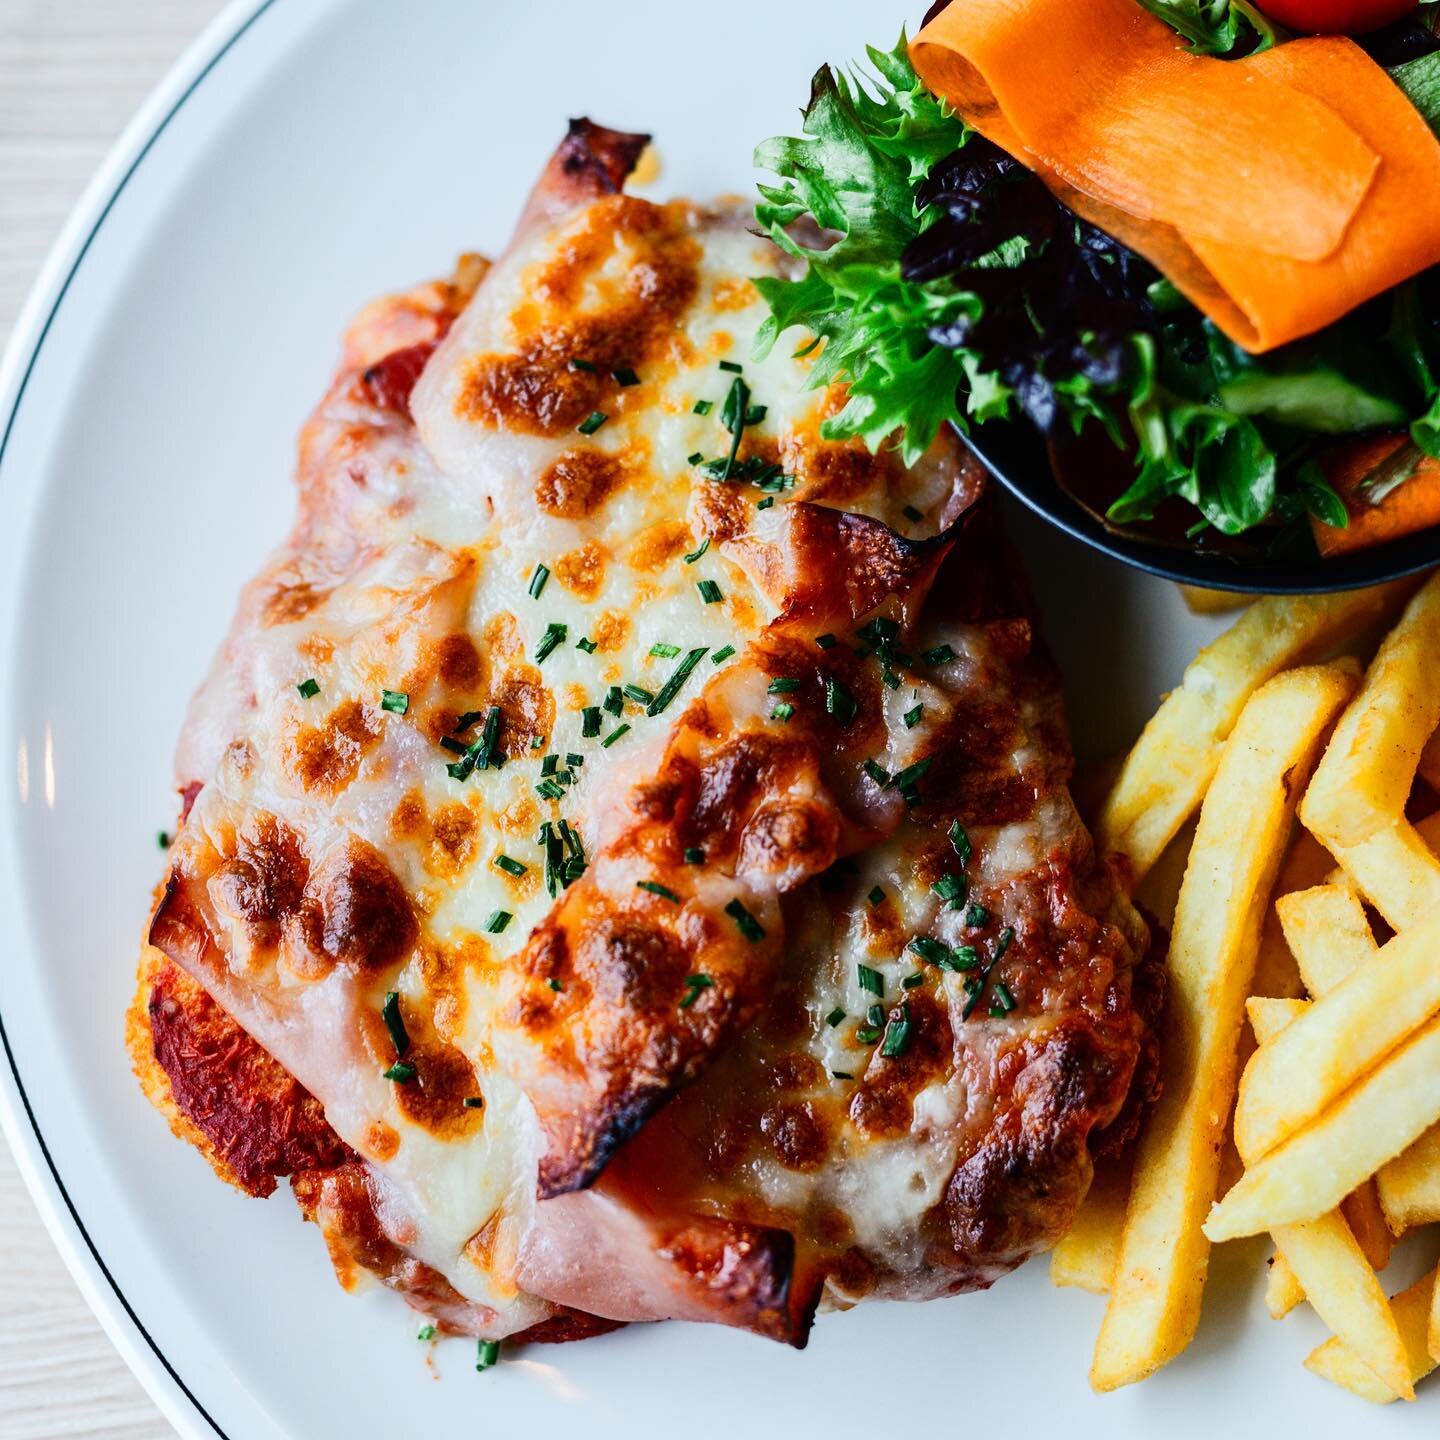 IT'S BACK TONIGHT!

Wednesday night is PARMA NIGHT @catalinawantirna

Enjoy this crowd favourite for only $18🍴

Book ahead to reserve your seat

Don't forget it's all night HAPPY HOUR!

$5 Tap Beers
$5 House Wines
$10 Spritz &amp; Espresso Martini